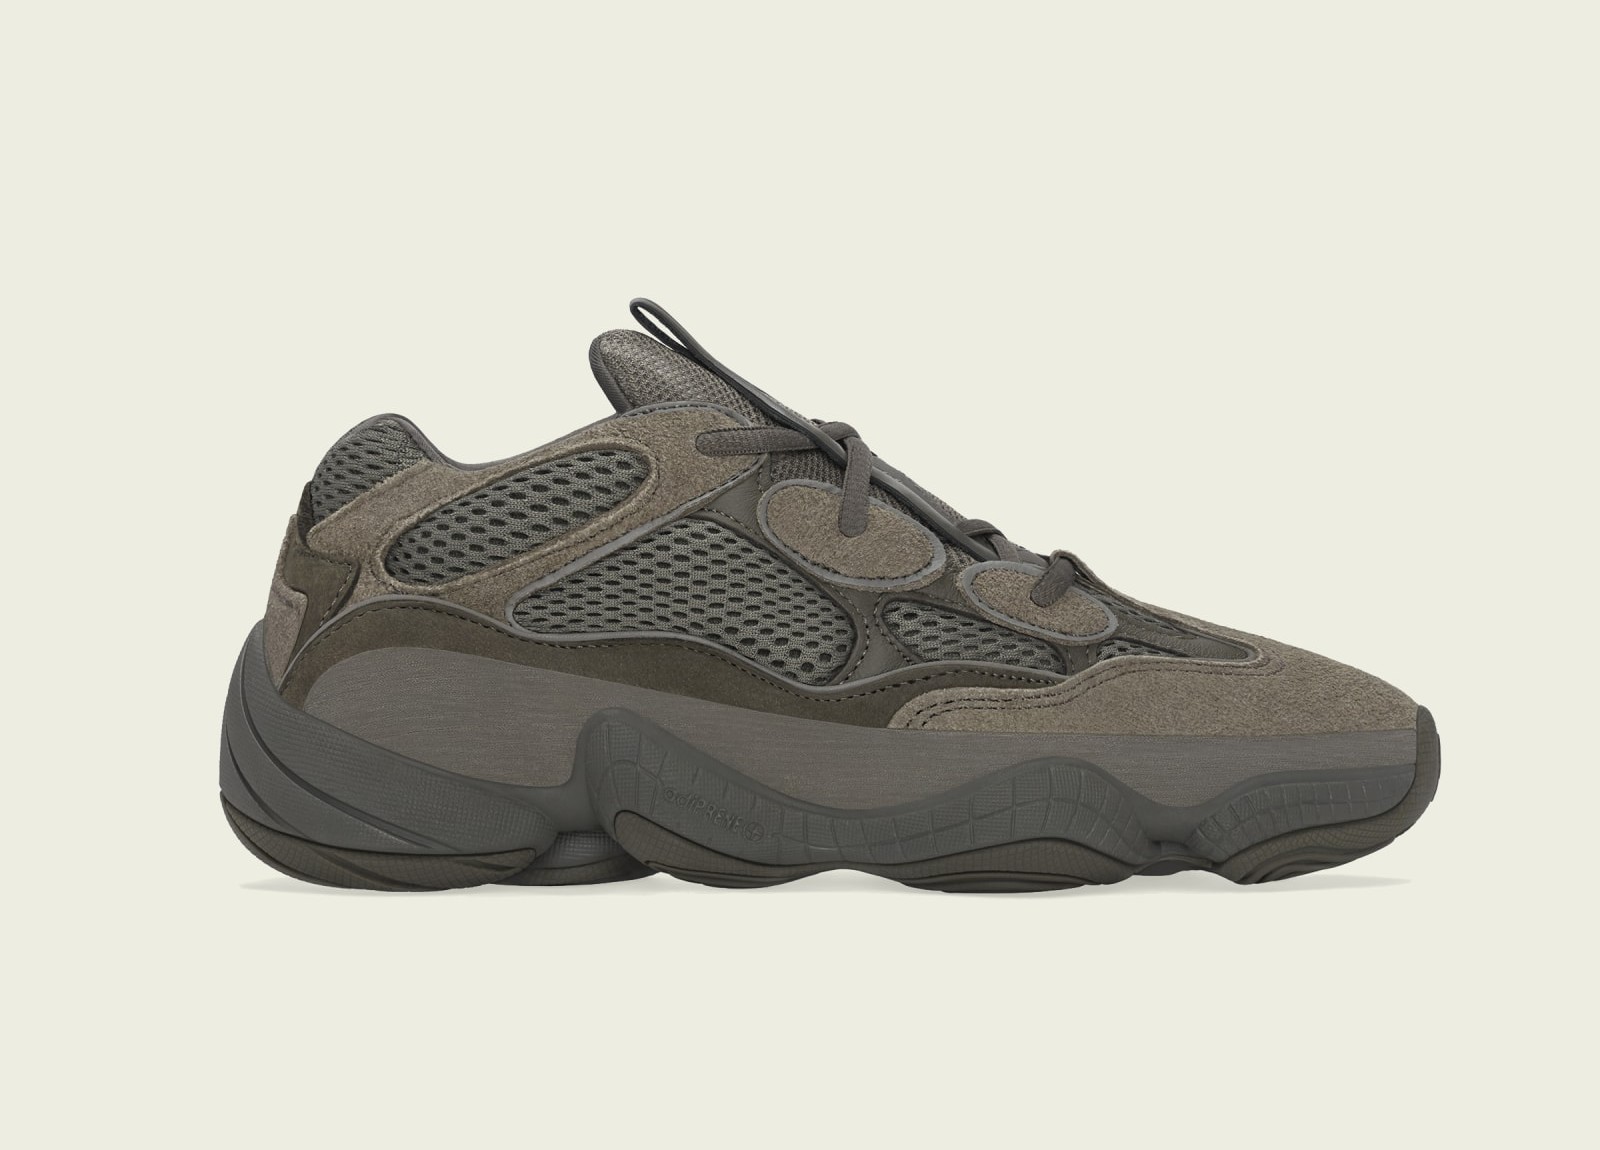 Adidas Yeezy 500
« Clay Brown »